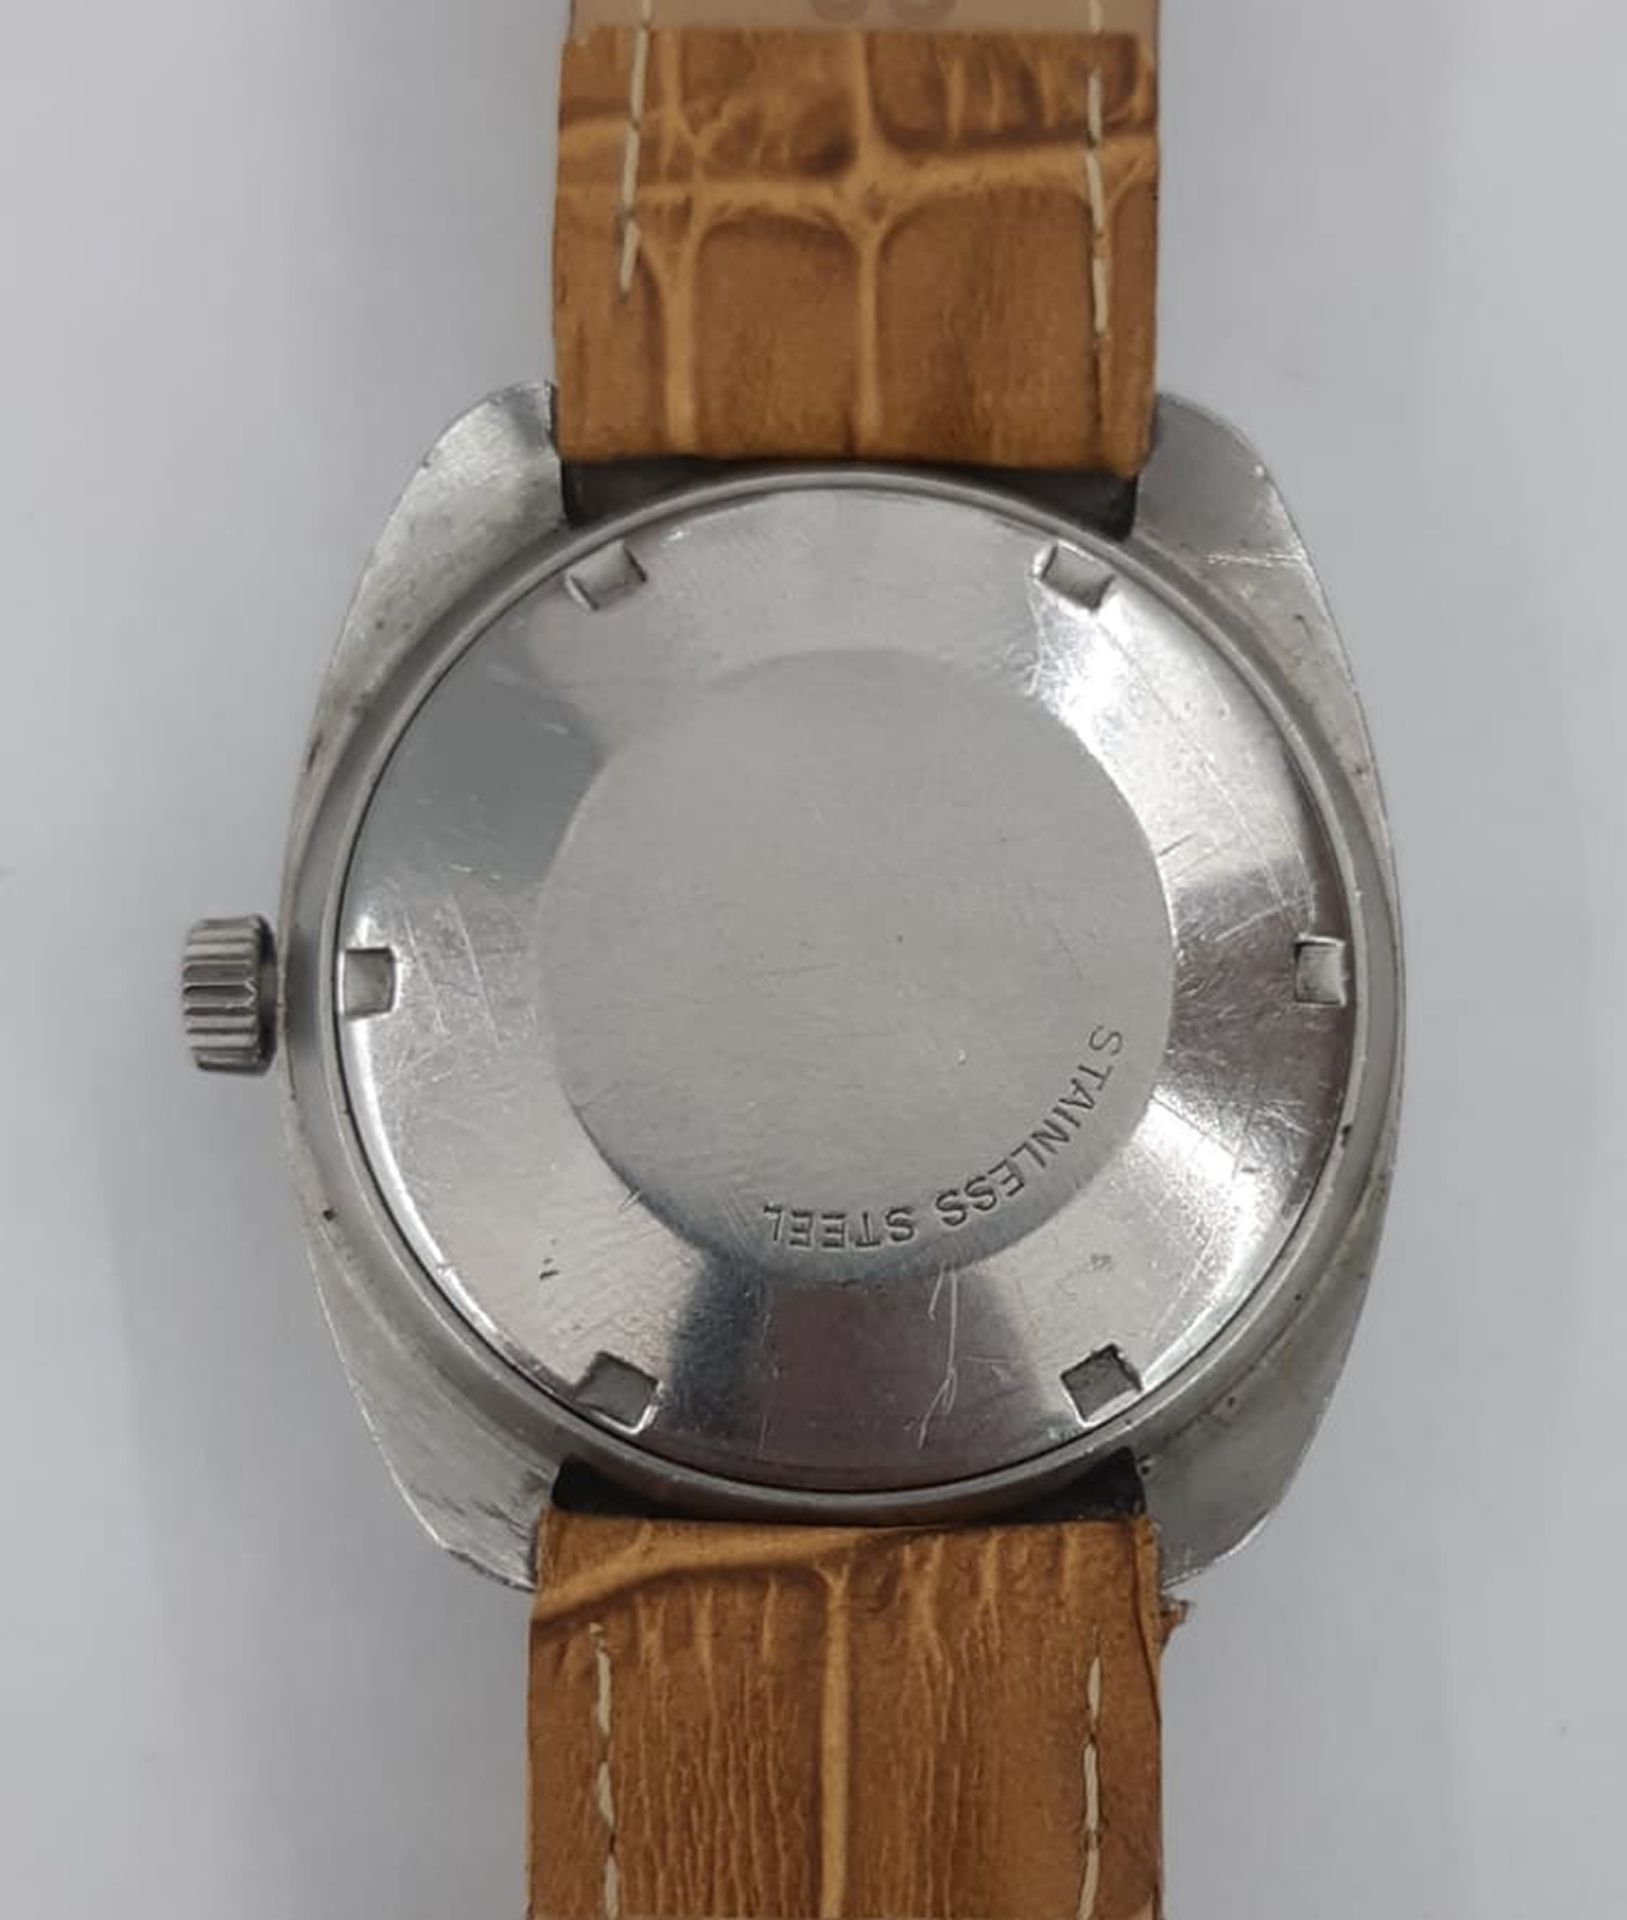 Rare Longines Automatic Admiral, 1970s - Image 3 of 3